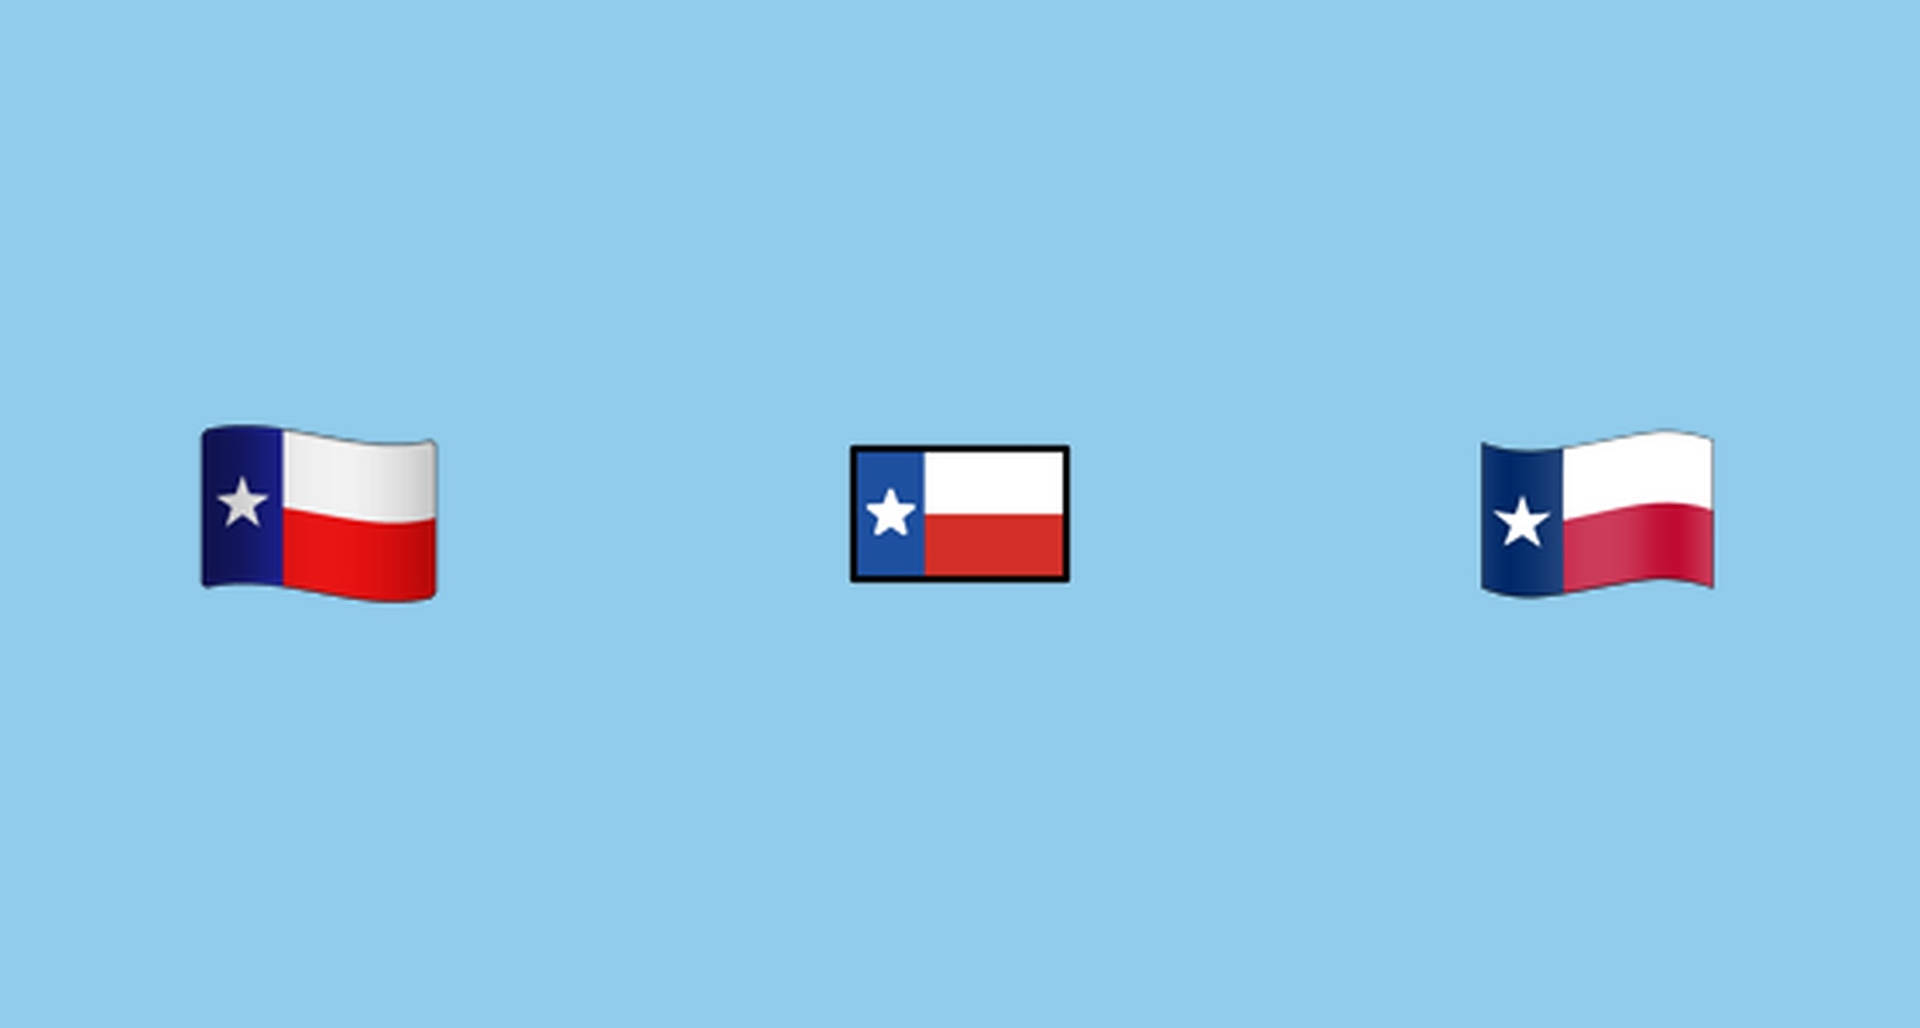 Minimalist Depiction Of The Texas State Flag